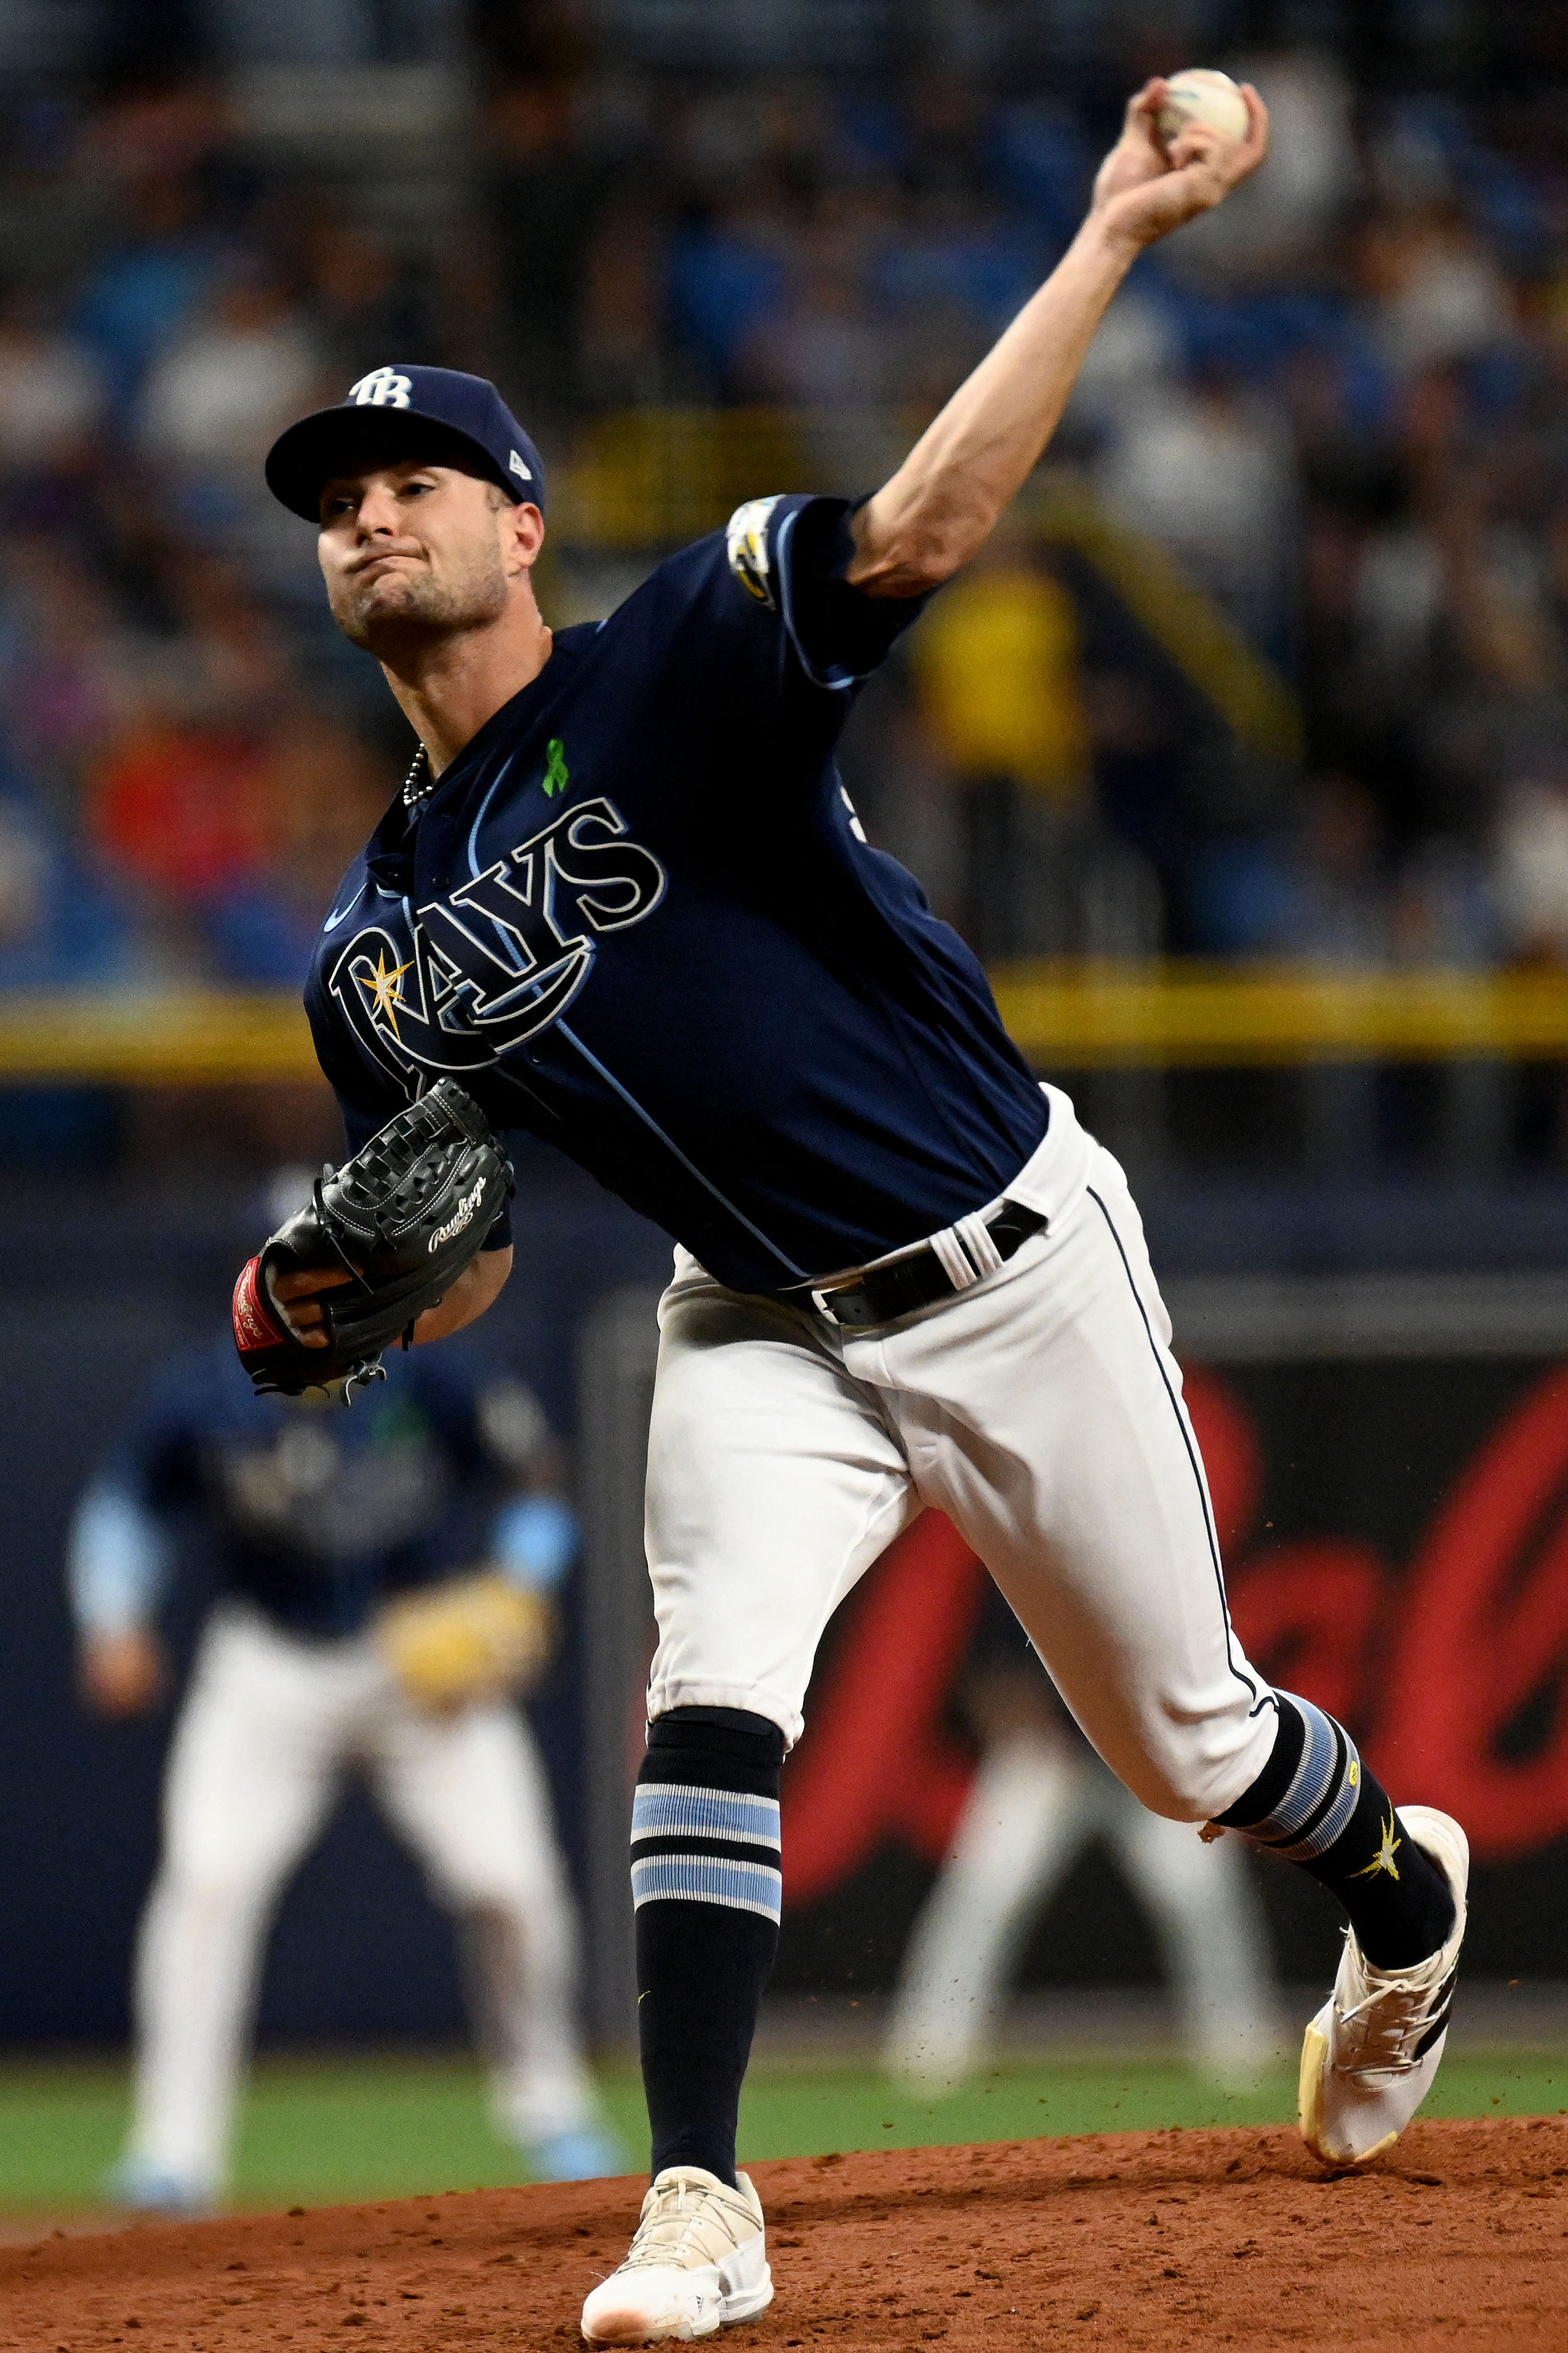 McClanahan improves to 6-0 as Rays beat Pirates 8-1